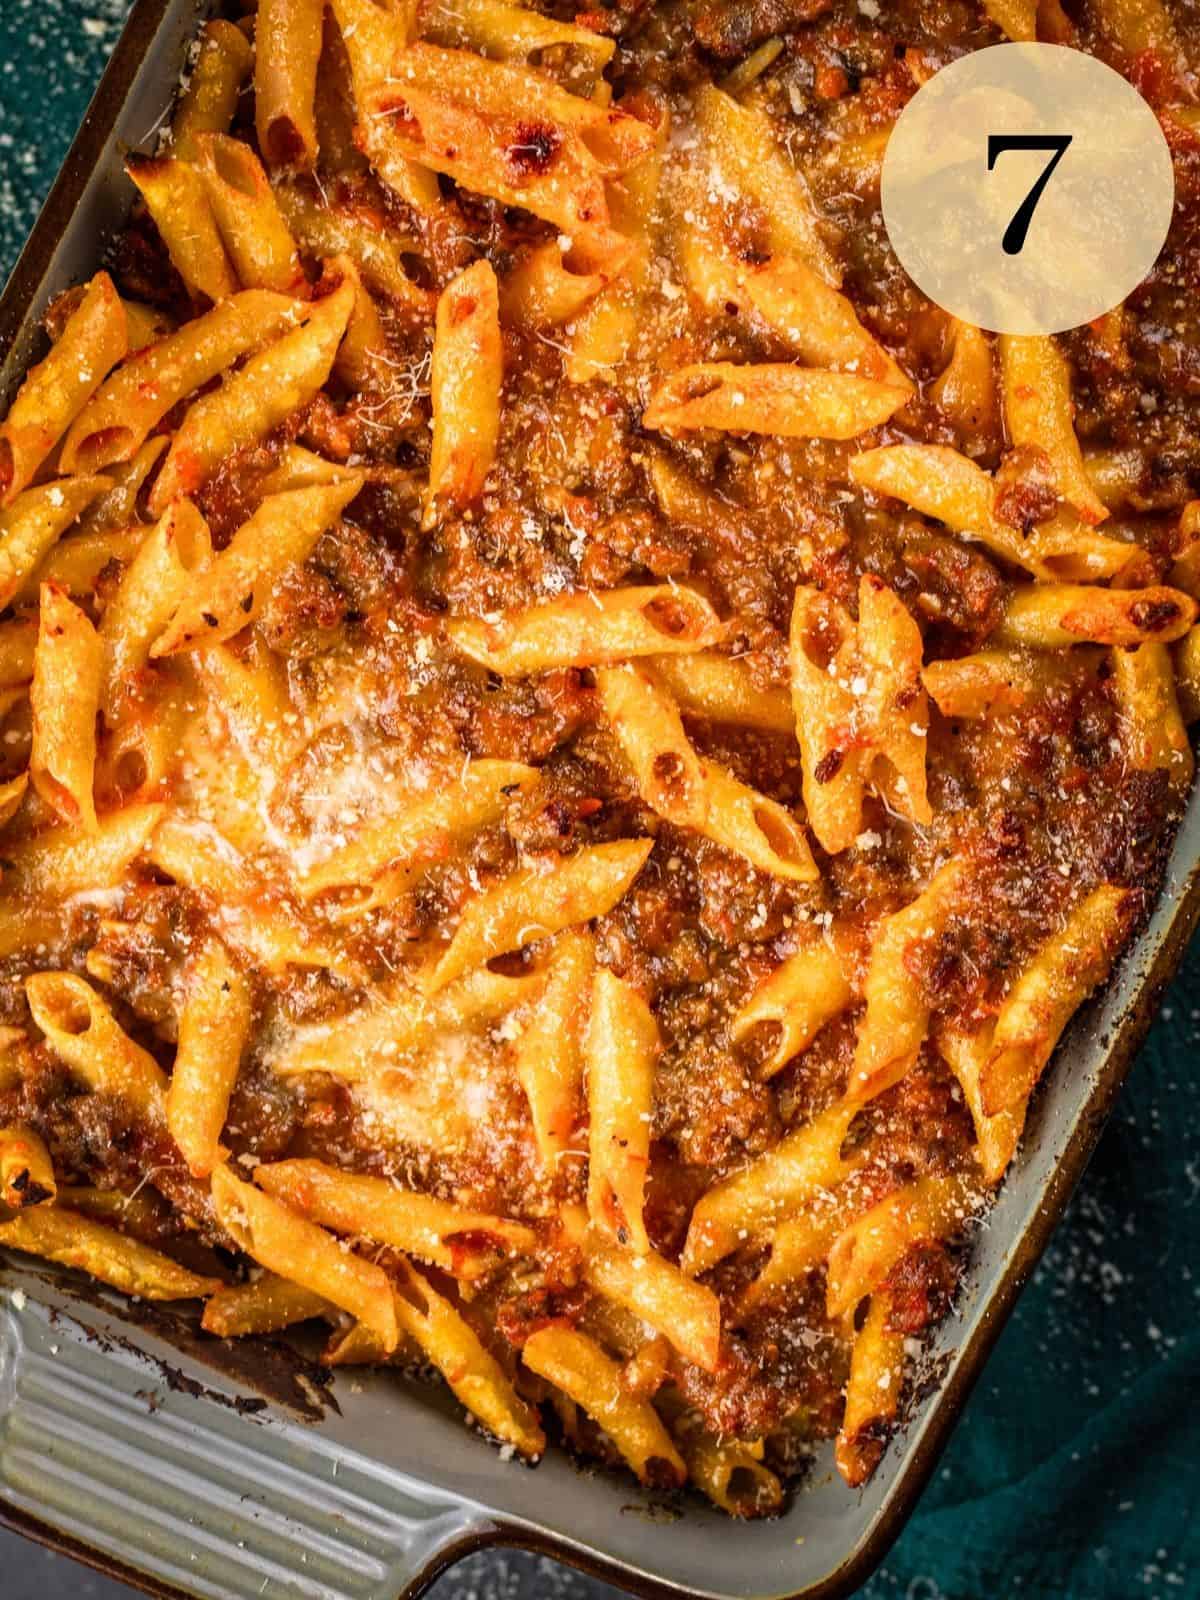 freshly baked mostaccioli pasta with cheese, sauce and italian sausage in a baking dish